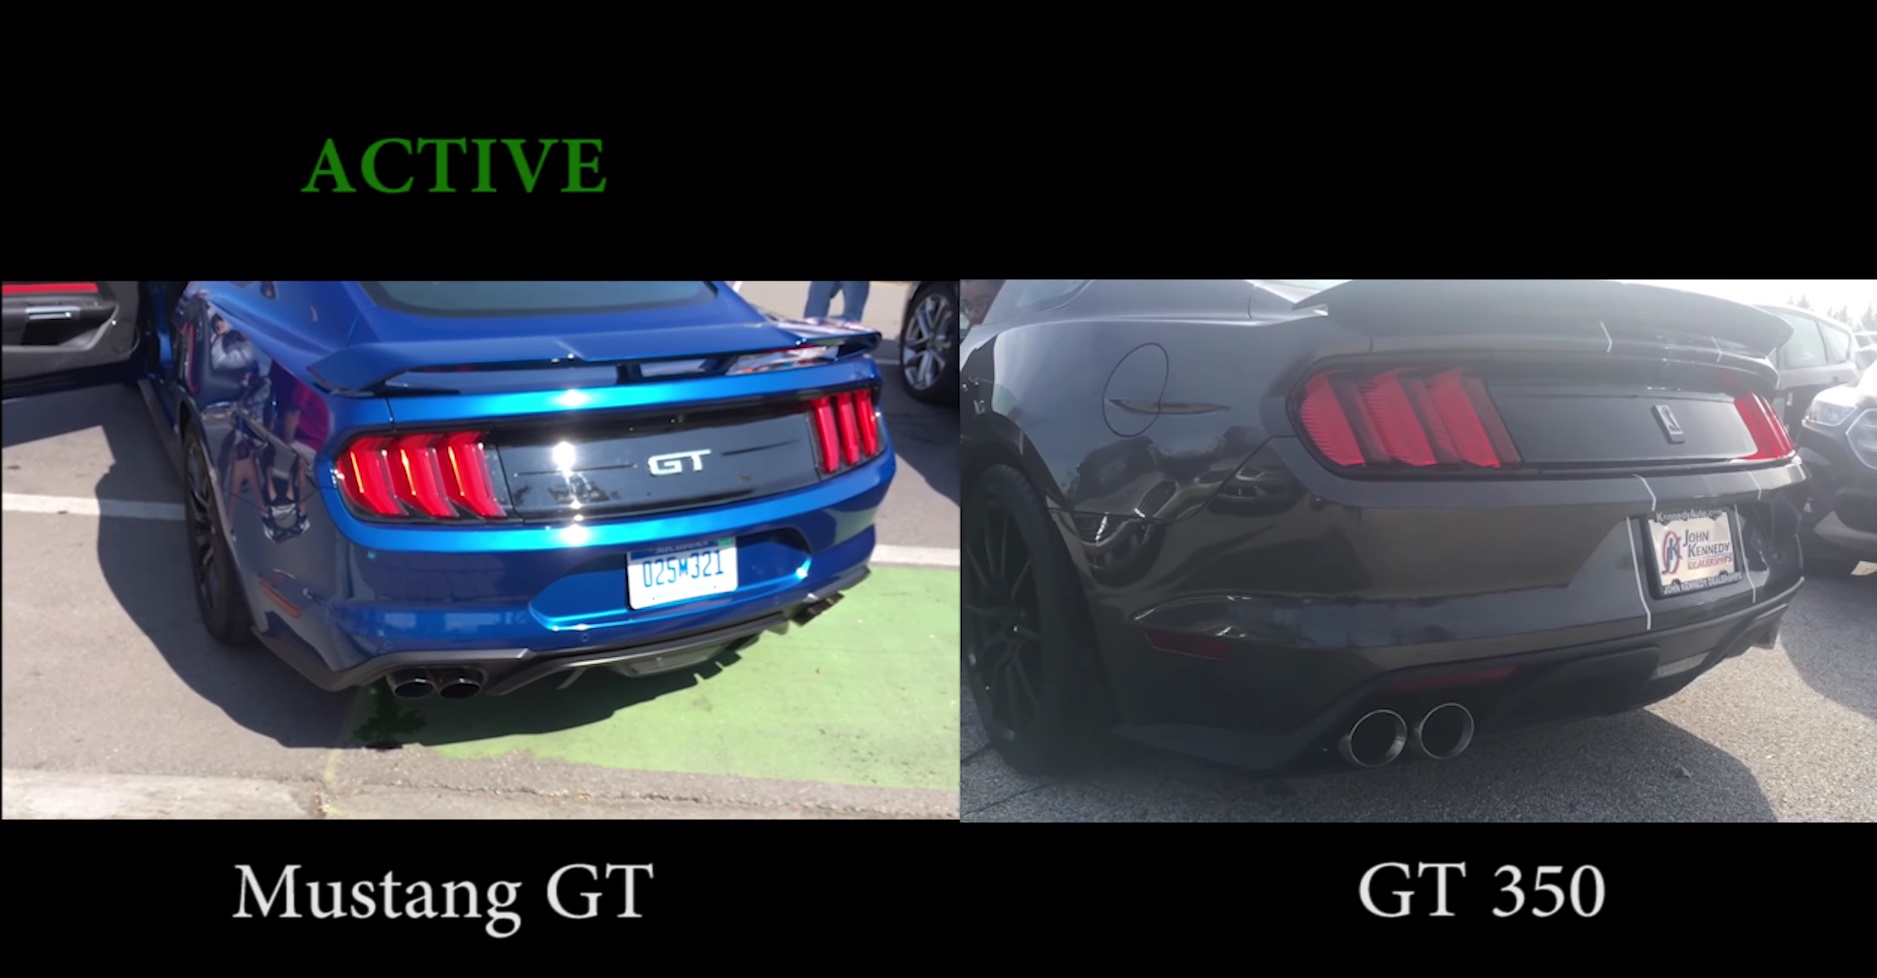 Video: 2018 Ford Mustang Shelby GT350 vs 2018 Ford Mustang GT - Exhaust Comparison